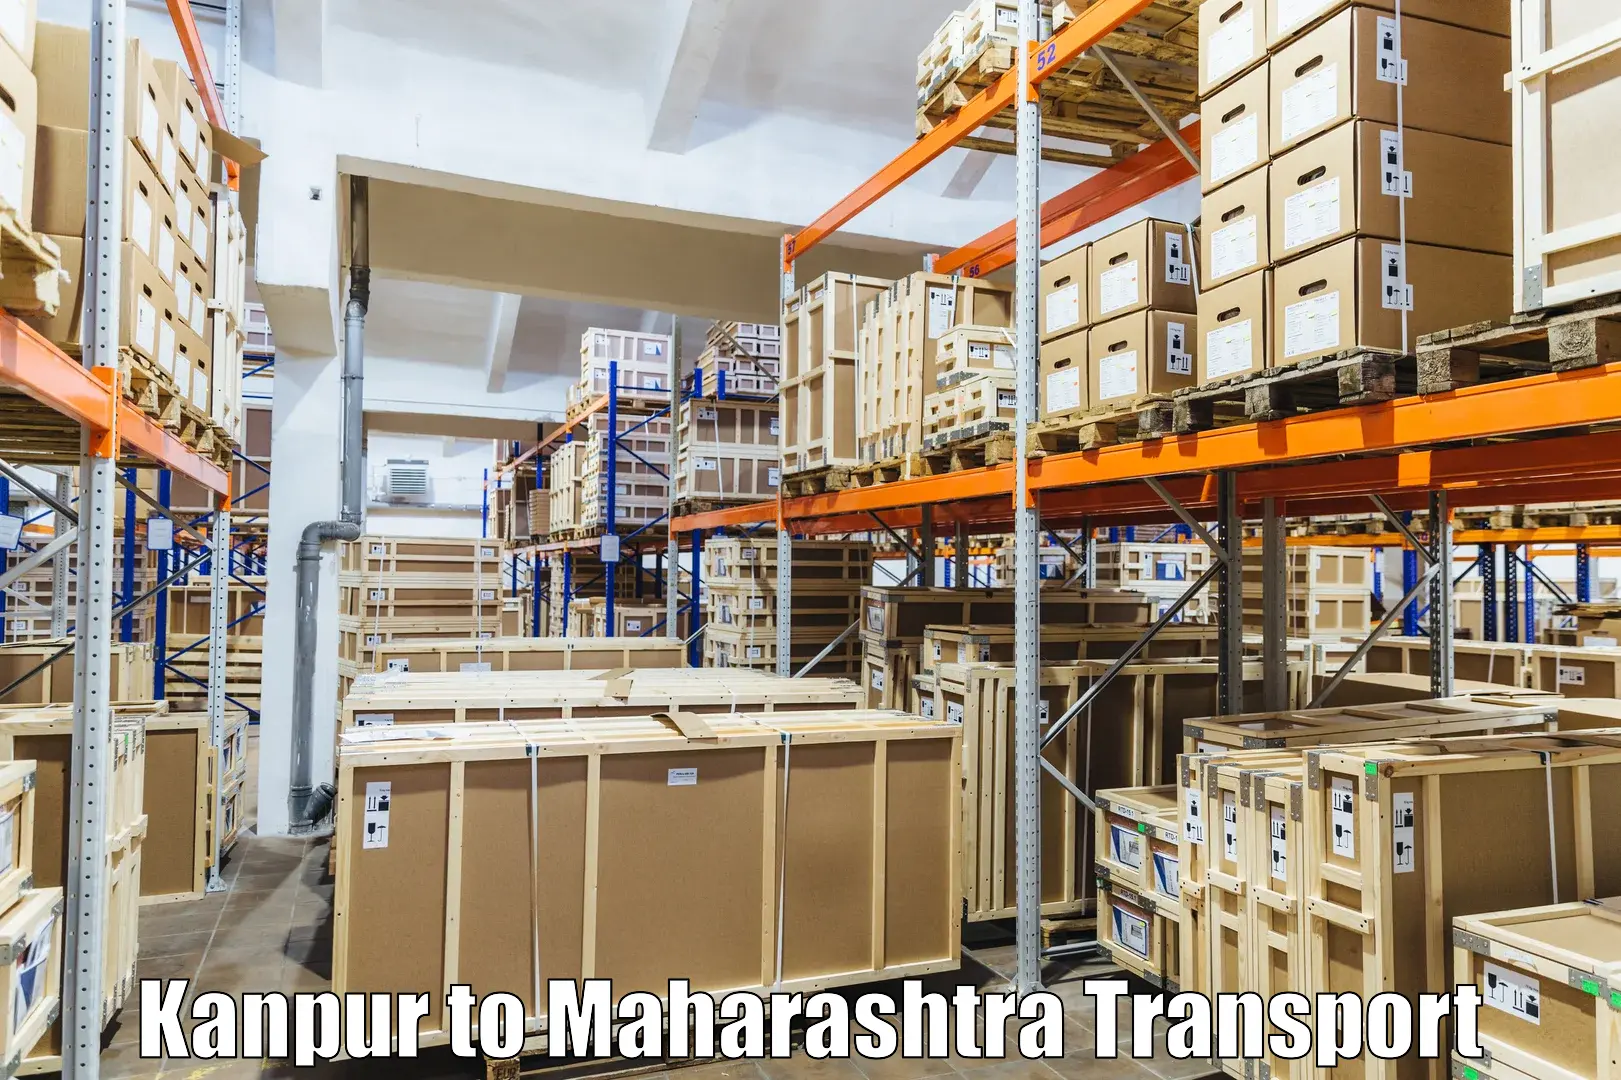 Transport in sharing Kanpur to Chandrapur